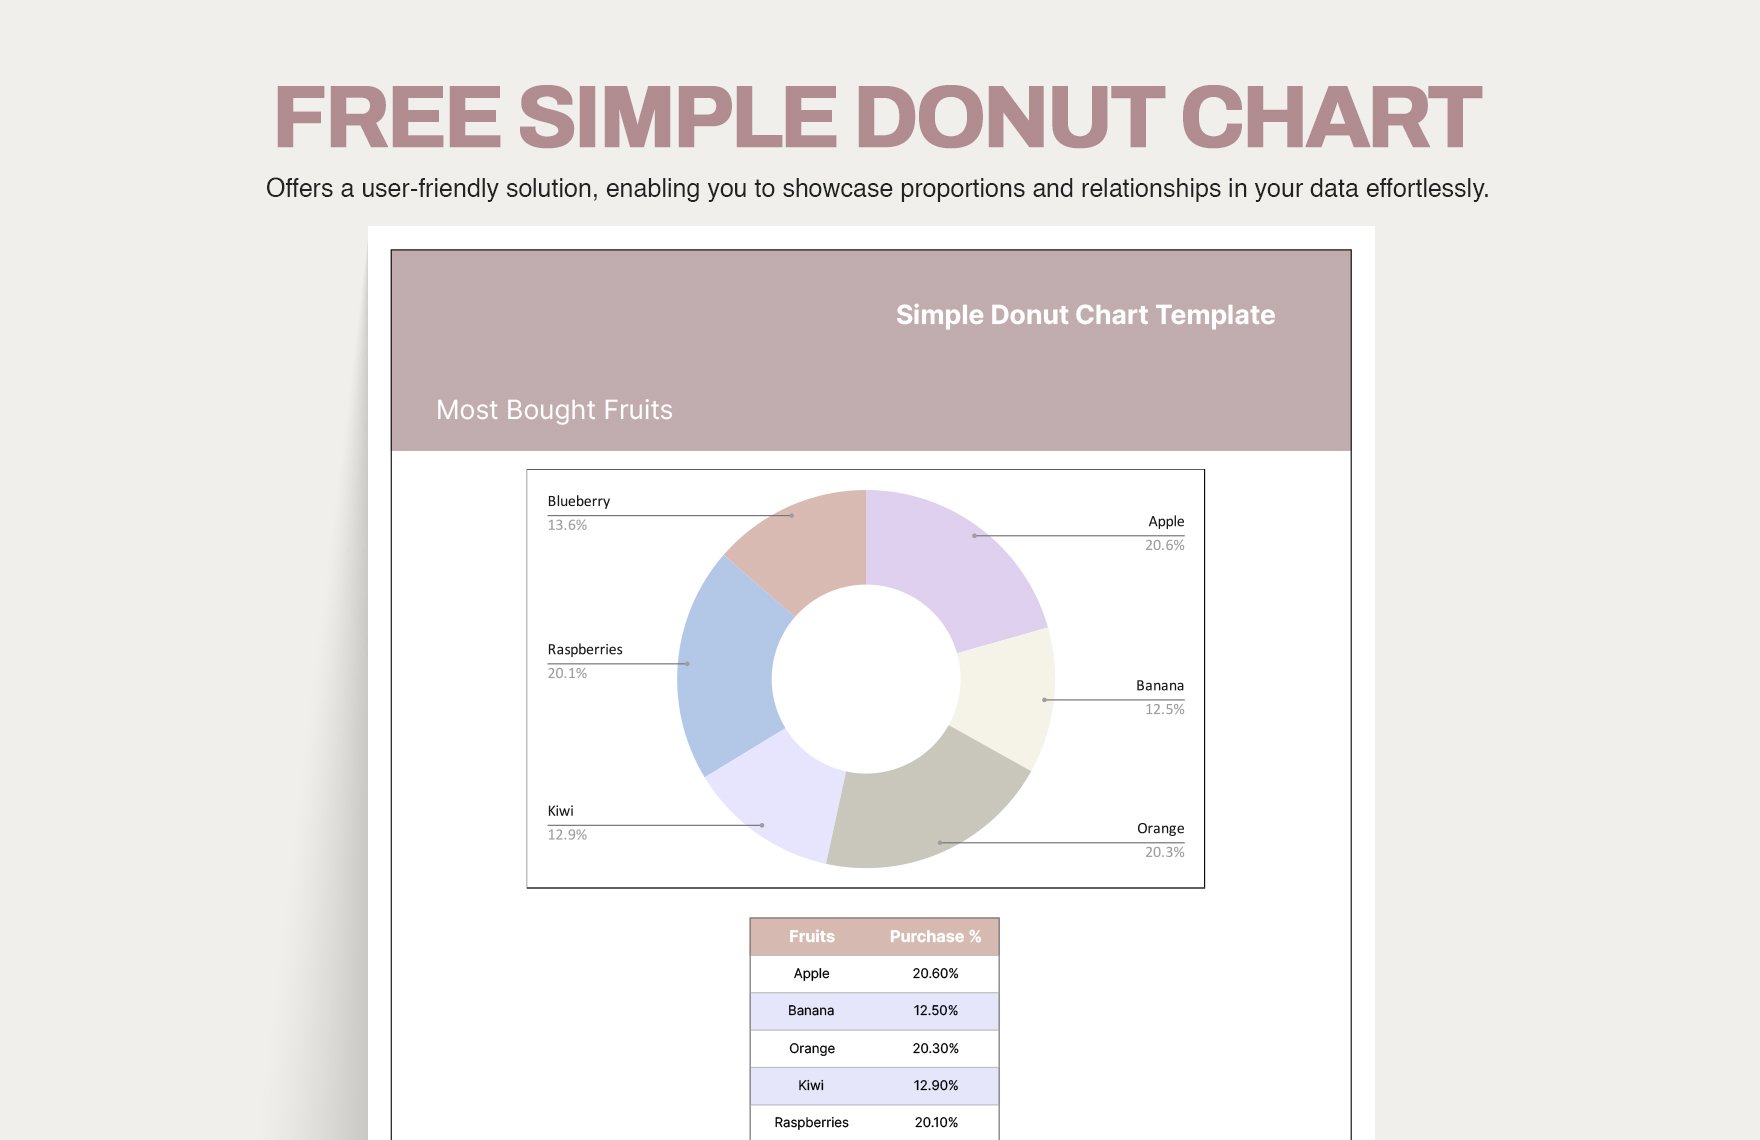 Simple Donut Chart Template